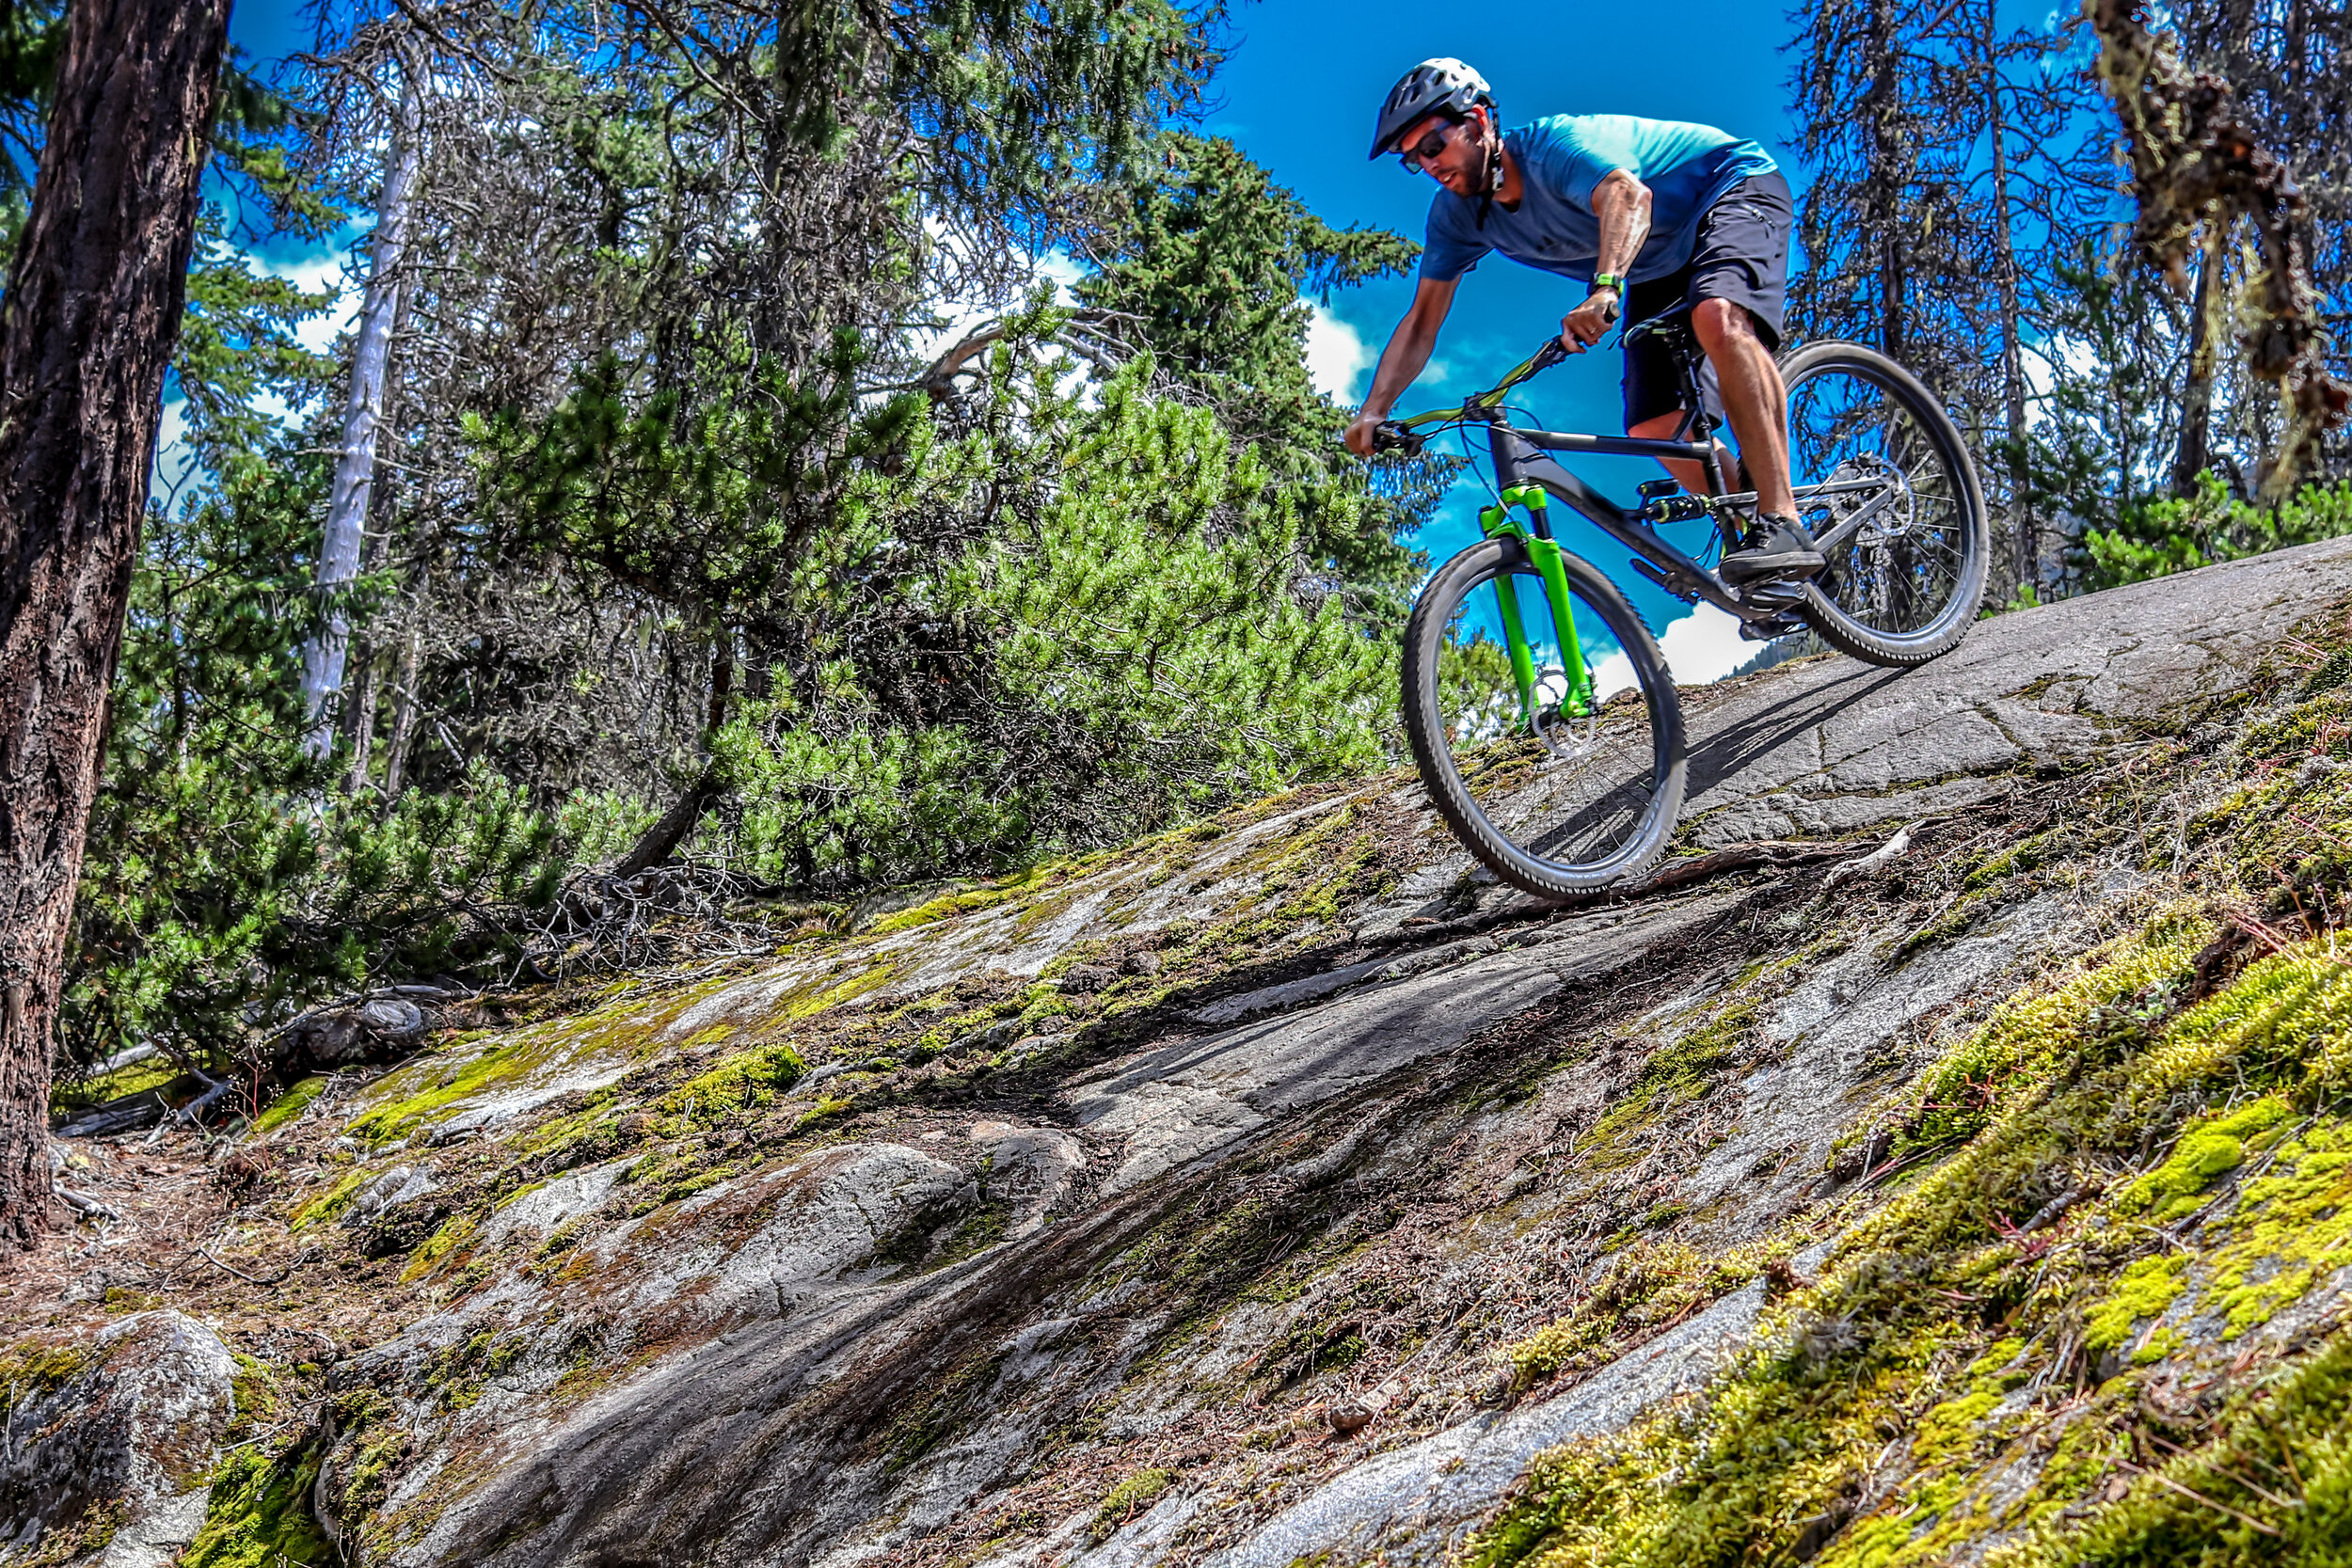 How To Spend 57 Hours In Bellingham, Washington As A Mountain Biker